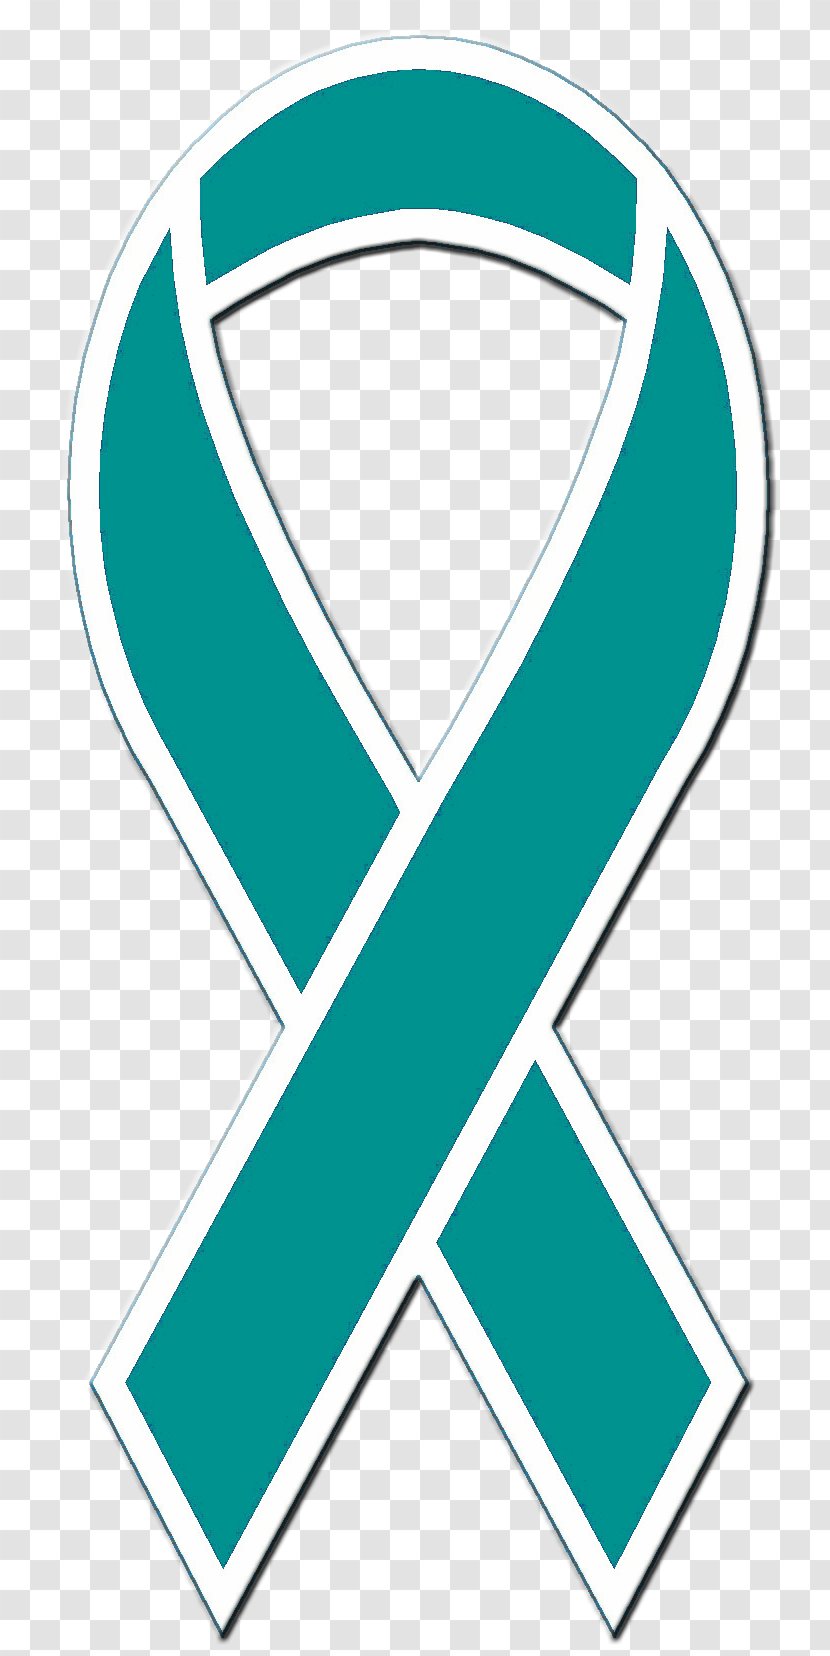 Epidemiology Of HIV/AIDS Awareness Ribbon Red - Domestic Violence - Teal Transparent PNG